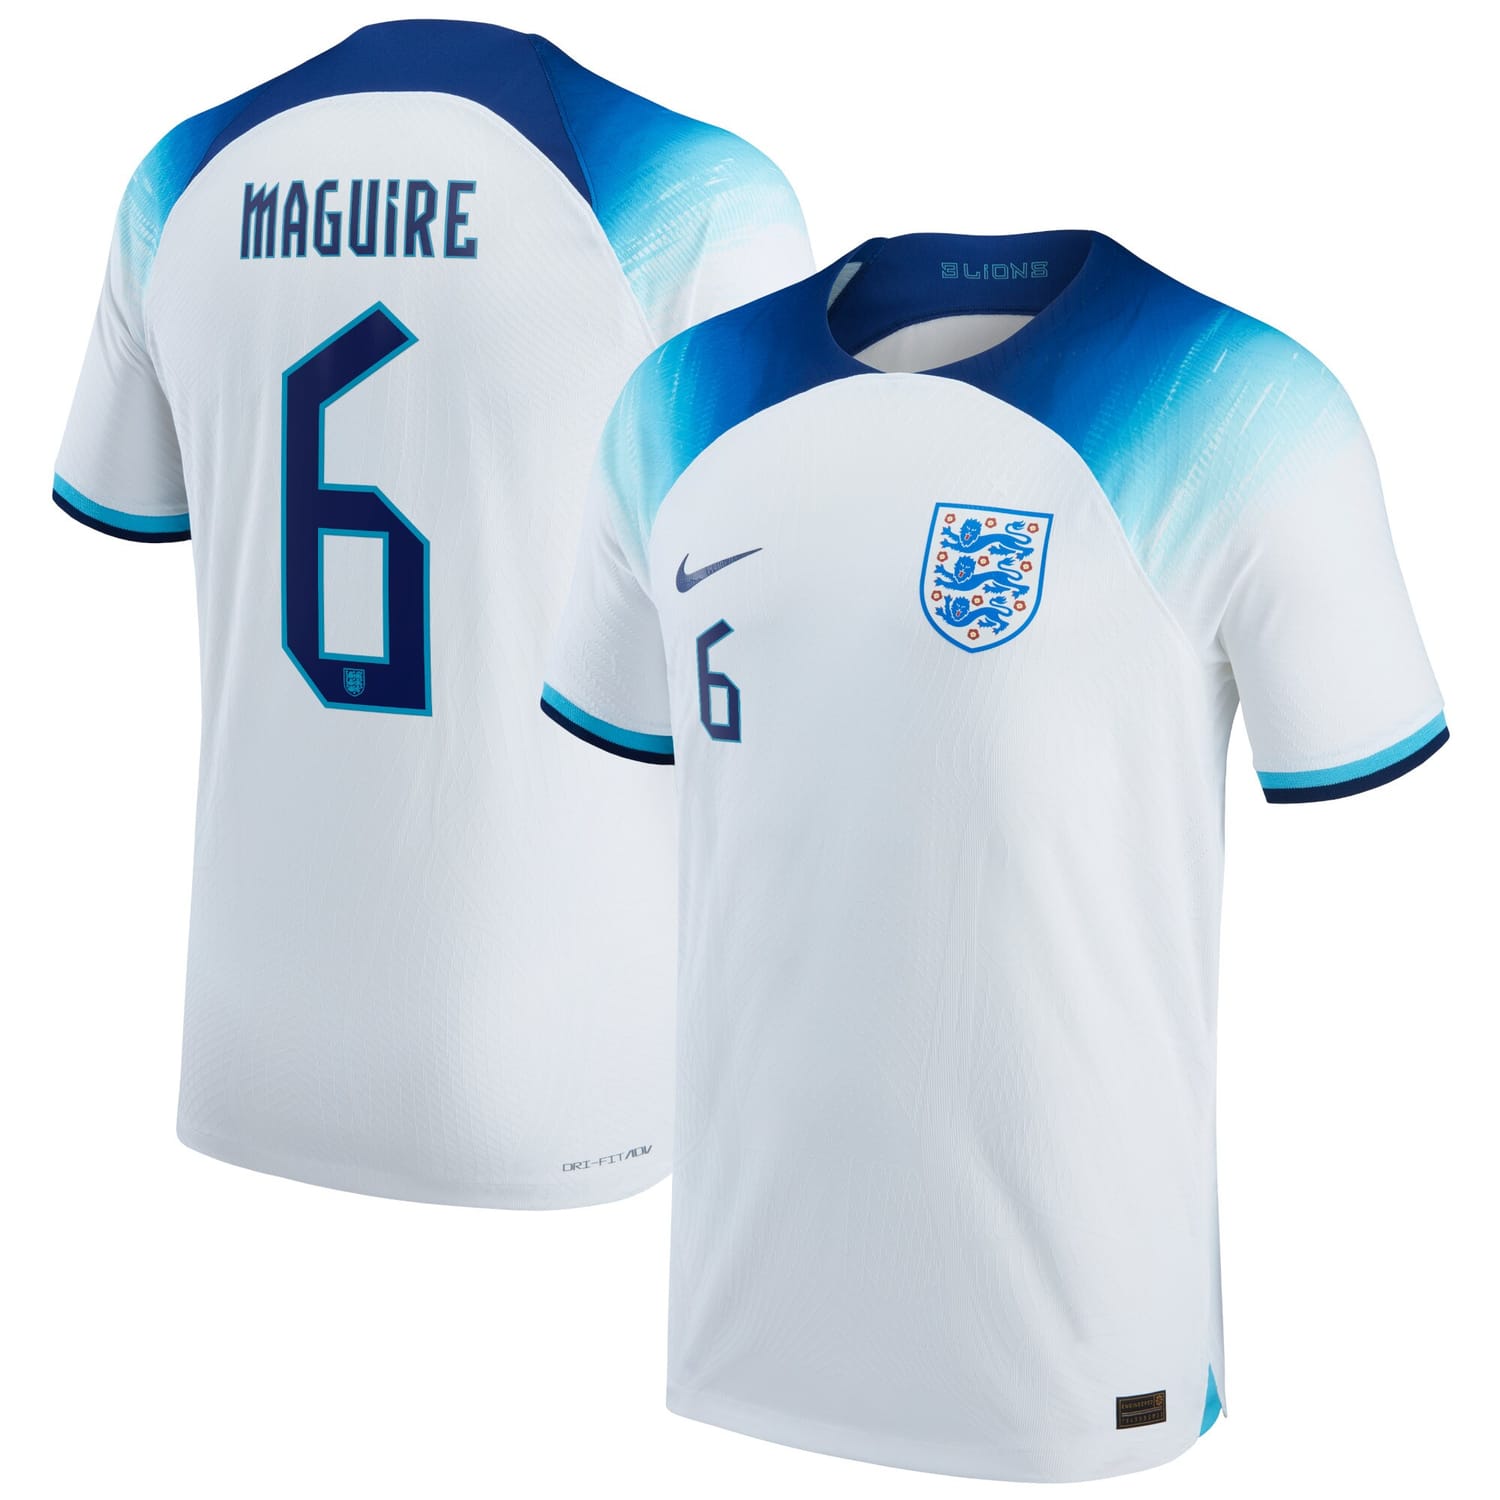 England National Team Home Authentic Jersey Shirt 2022 player Harry Maguire 6 printing for Men